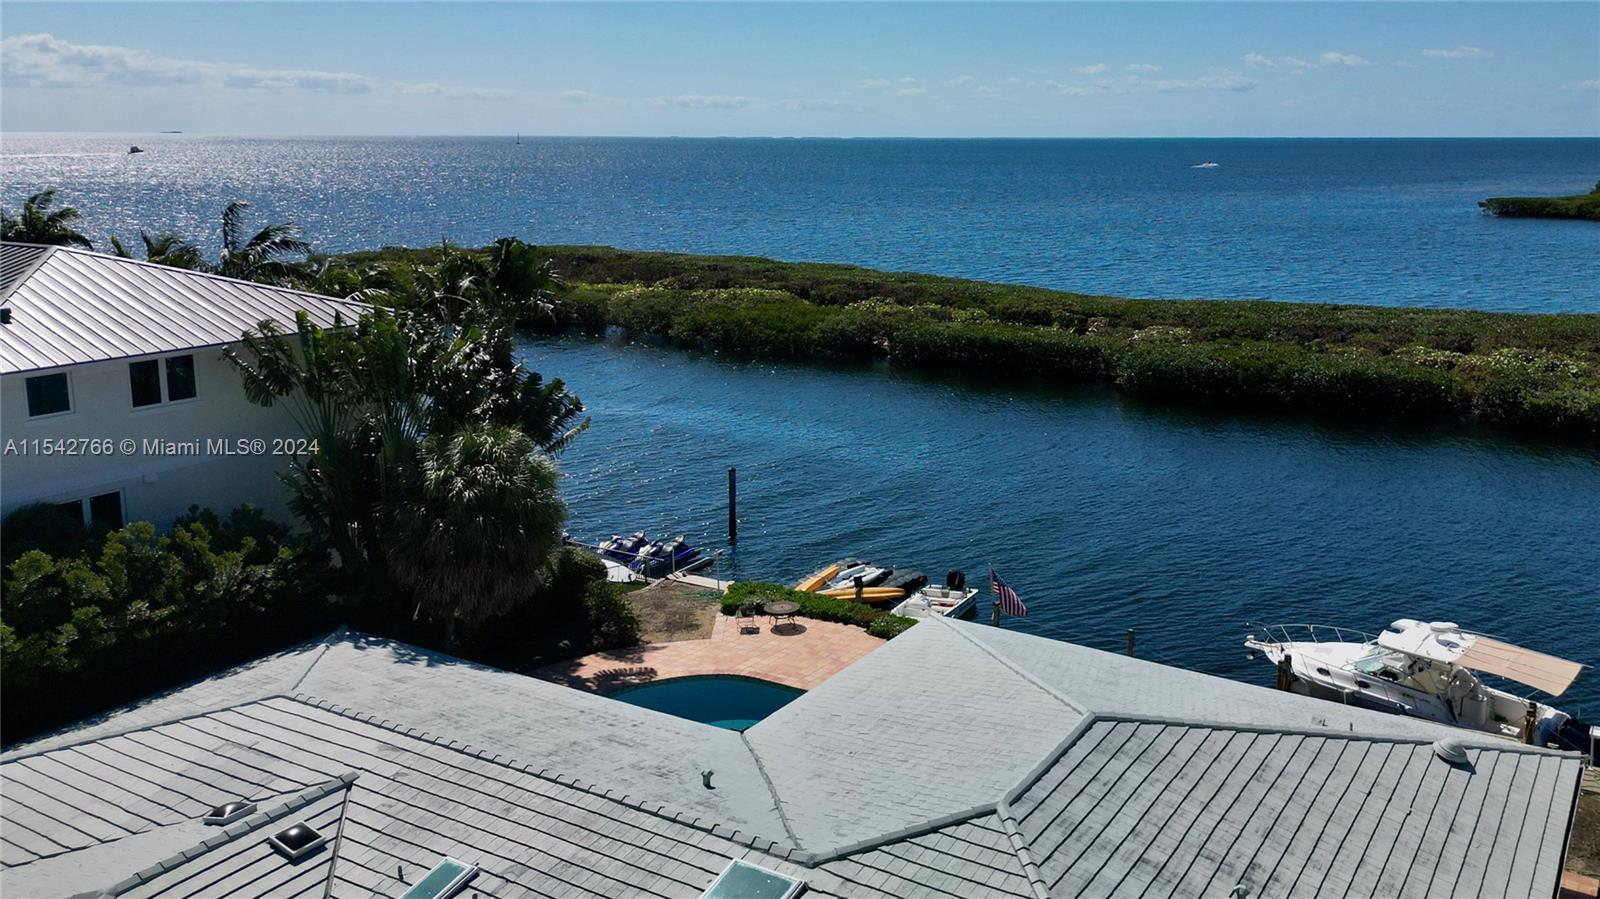 Boater's Paradise! A 12,000 square ft lot with 100 linear ft seawall. Prime location with views of Biscayne Bay which are wide open to the East and visible over a protective hedge of mangroves to the South. From your back door, be out on the bay in seconds. The great room, kitchen, and bedrooms face the water and are bathed in sunlight through panoramic windows which provide amazing views.  This property is move-in ready for the next owner to enjoy the best of Miami waterfront living, but also affords a tremendous opportunity: if redeveloped to the elevation of neighboring homes, this lot will offer endless wide open bay front views.  Either way an incredible investment!